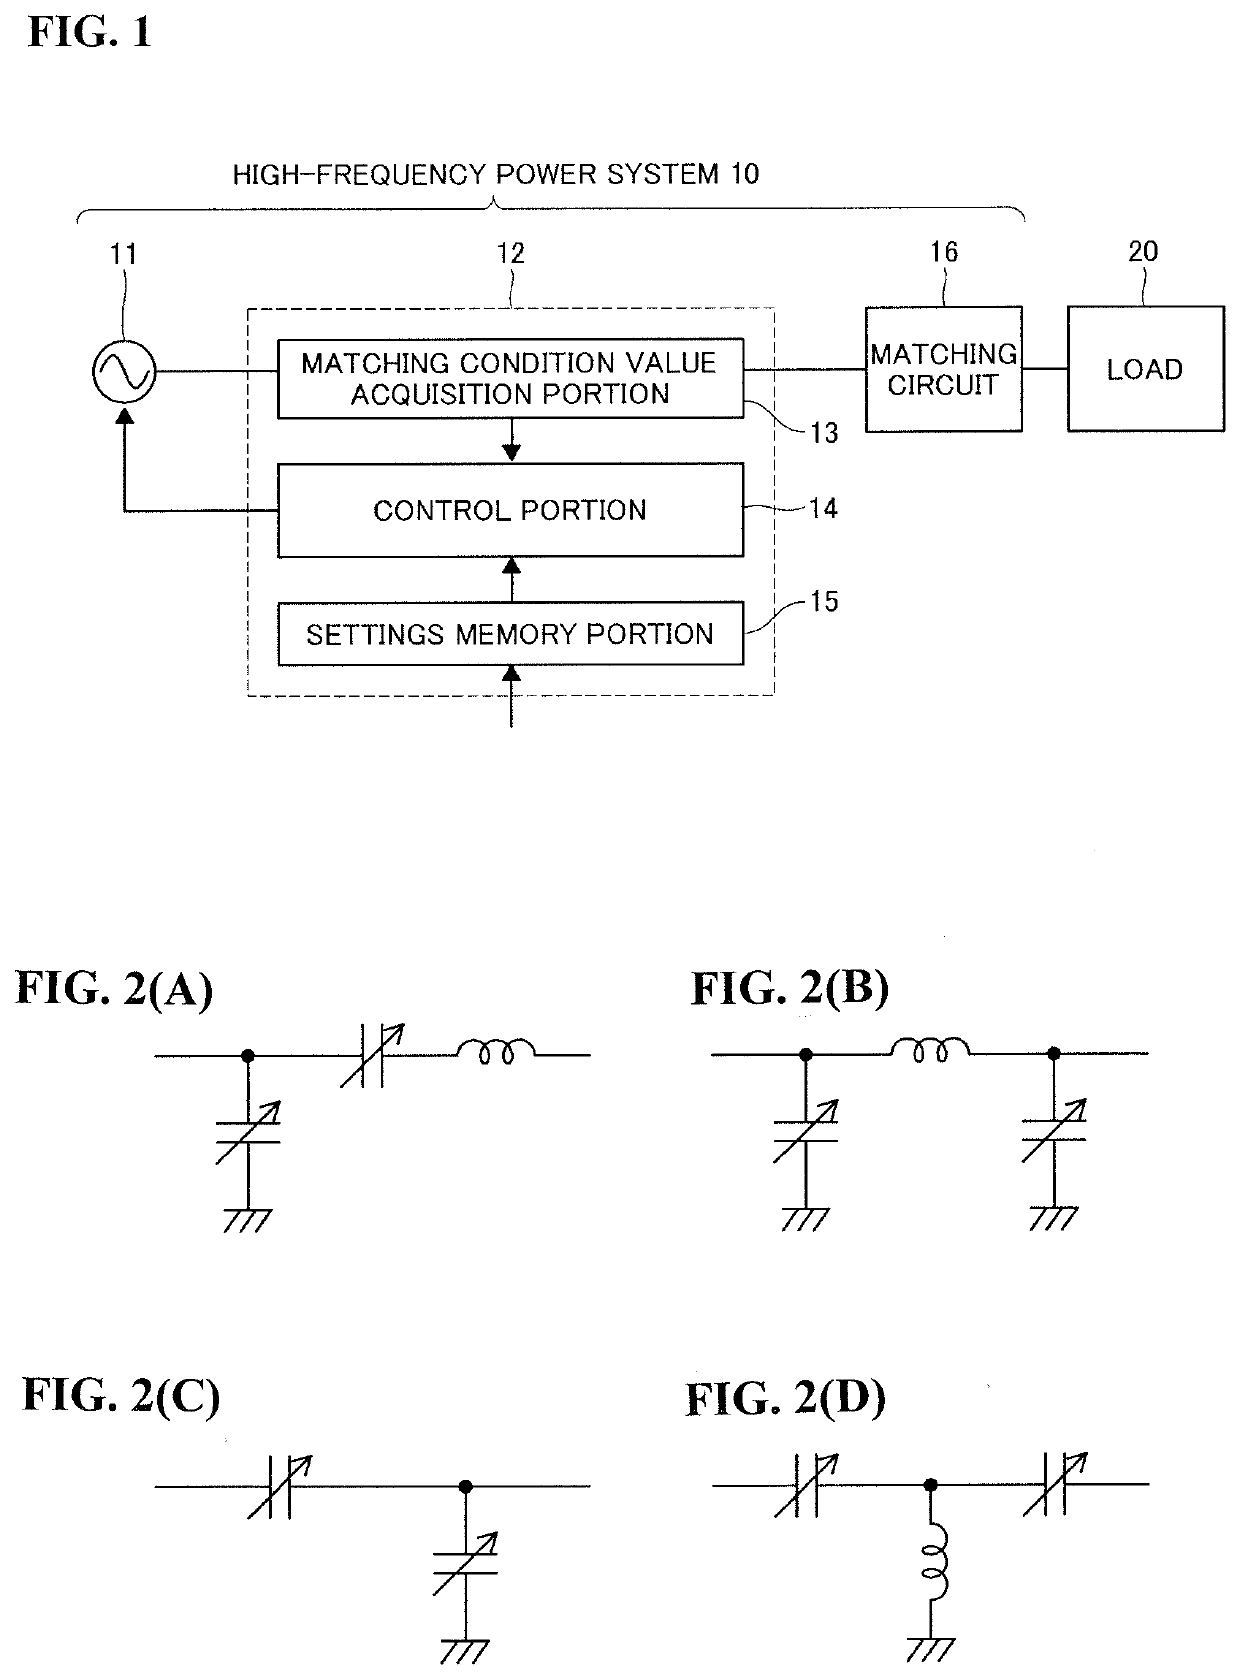 Impedance matching device provided in high-frequency power system